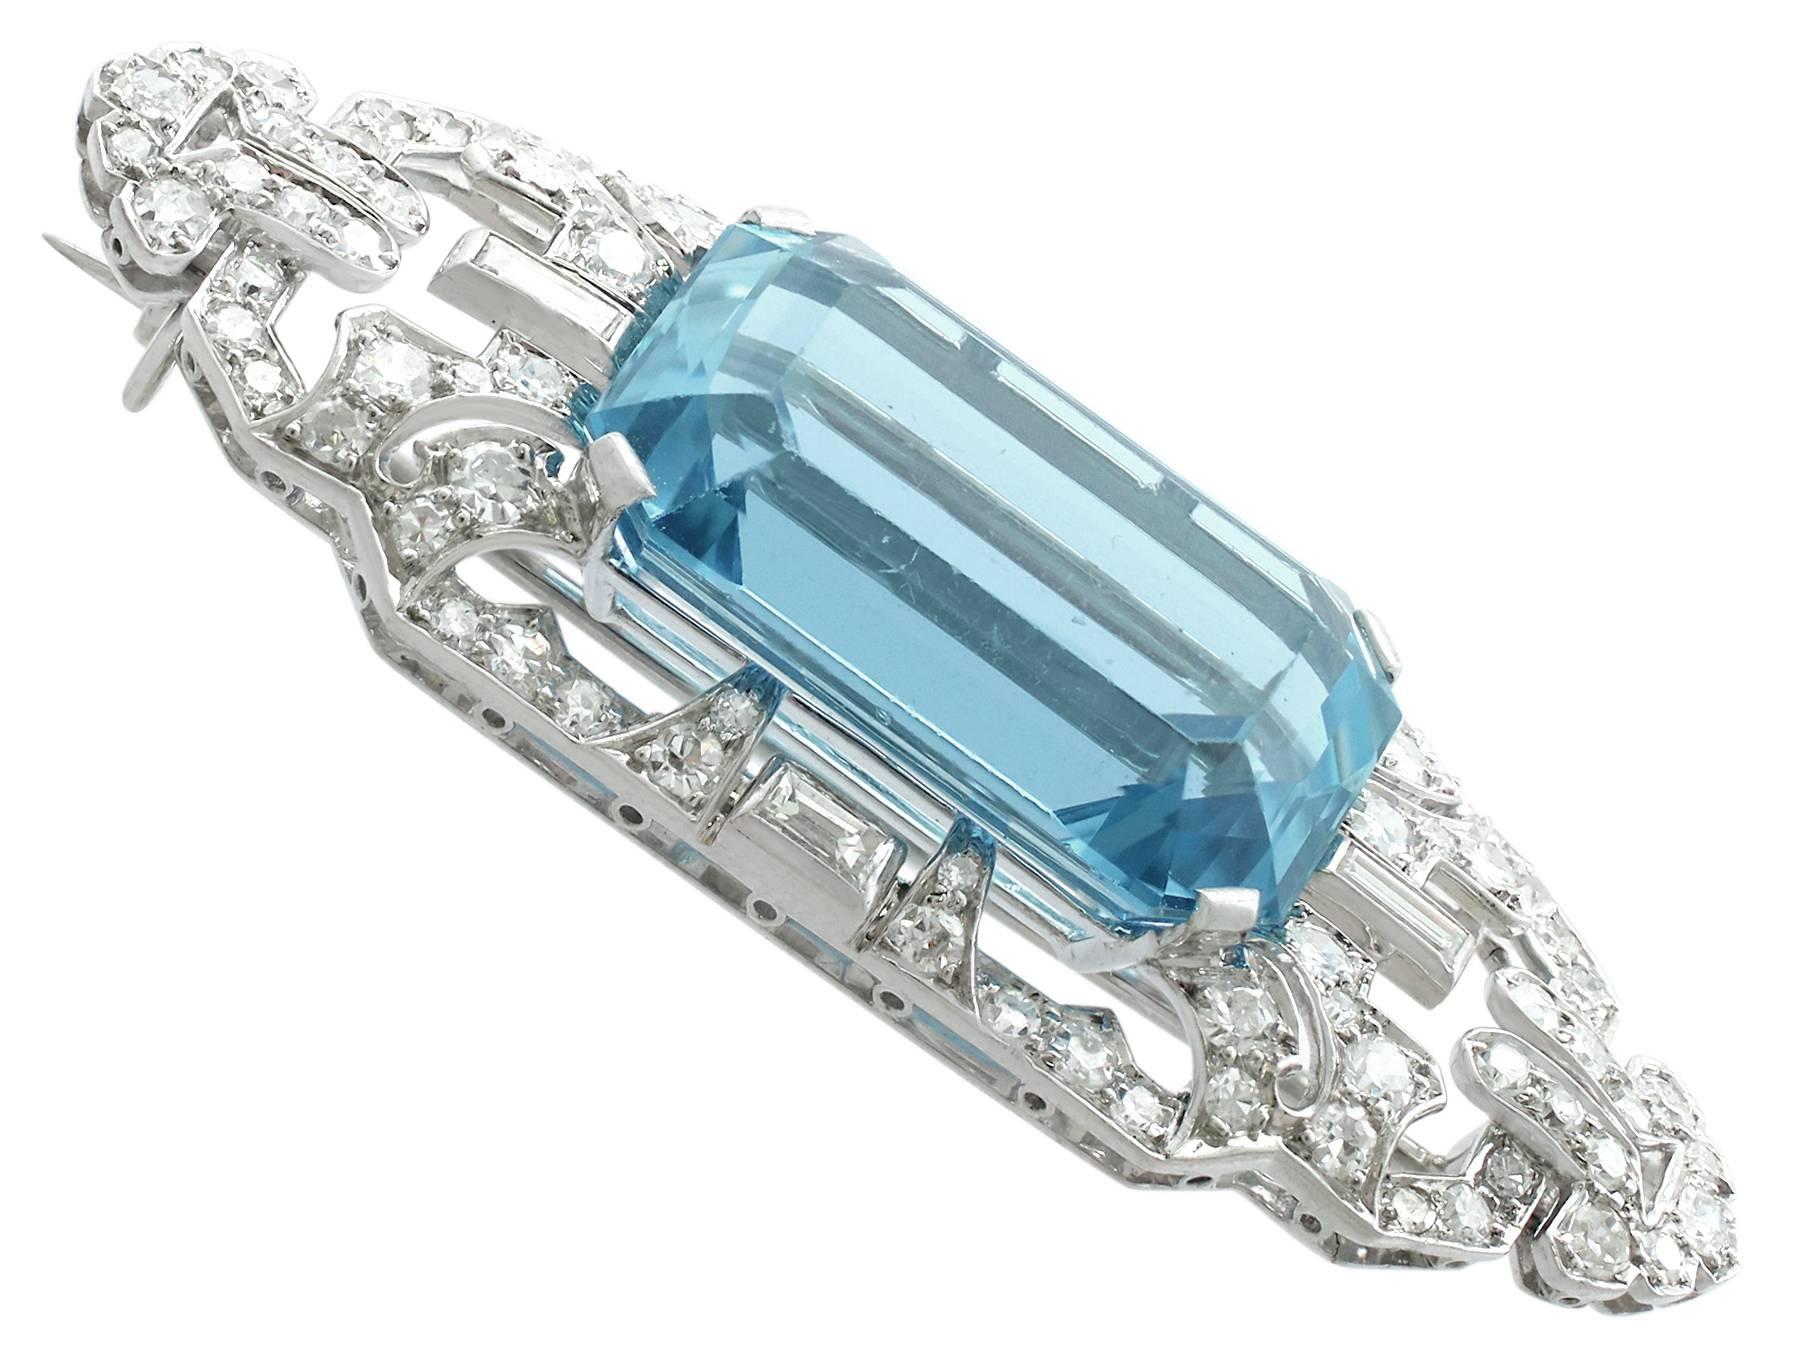 A magnificent and stunning 1.48 carat diamond, 19.82 carat aquamarine brooch in platinum made by Liberty; part of 's authentic antique Art Deco jewelly and estate jewelry collections

This magnificent antique brooch made by Liberty* has been crafted